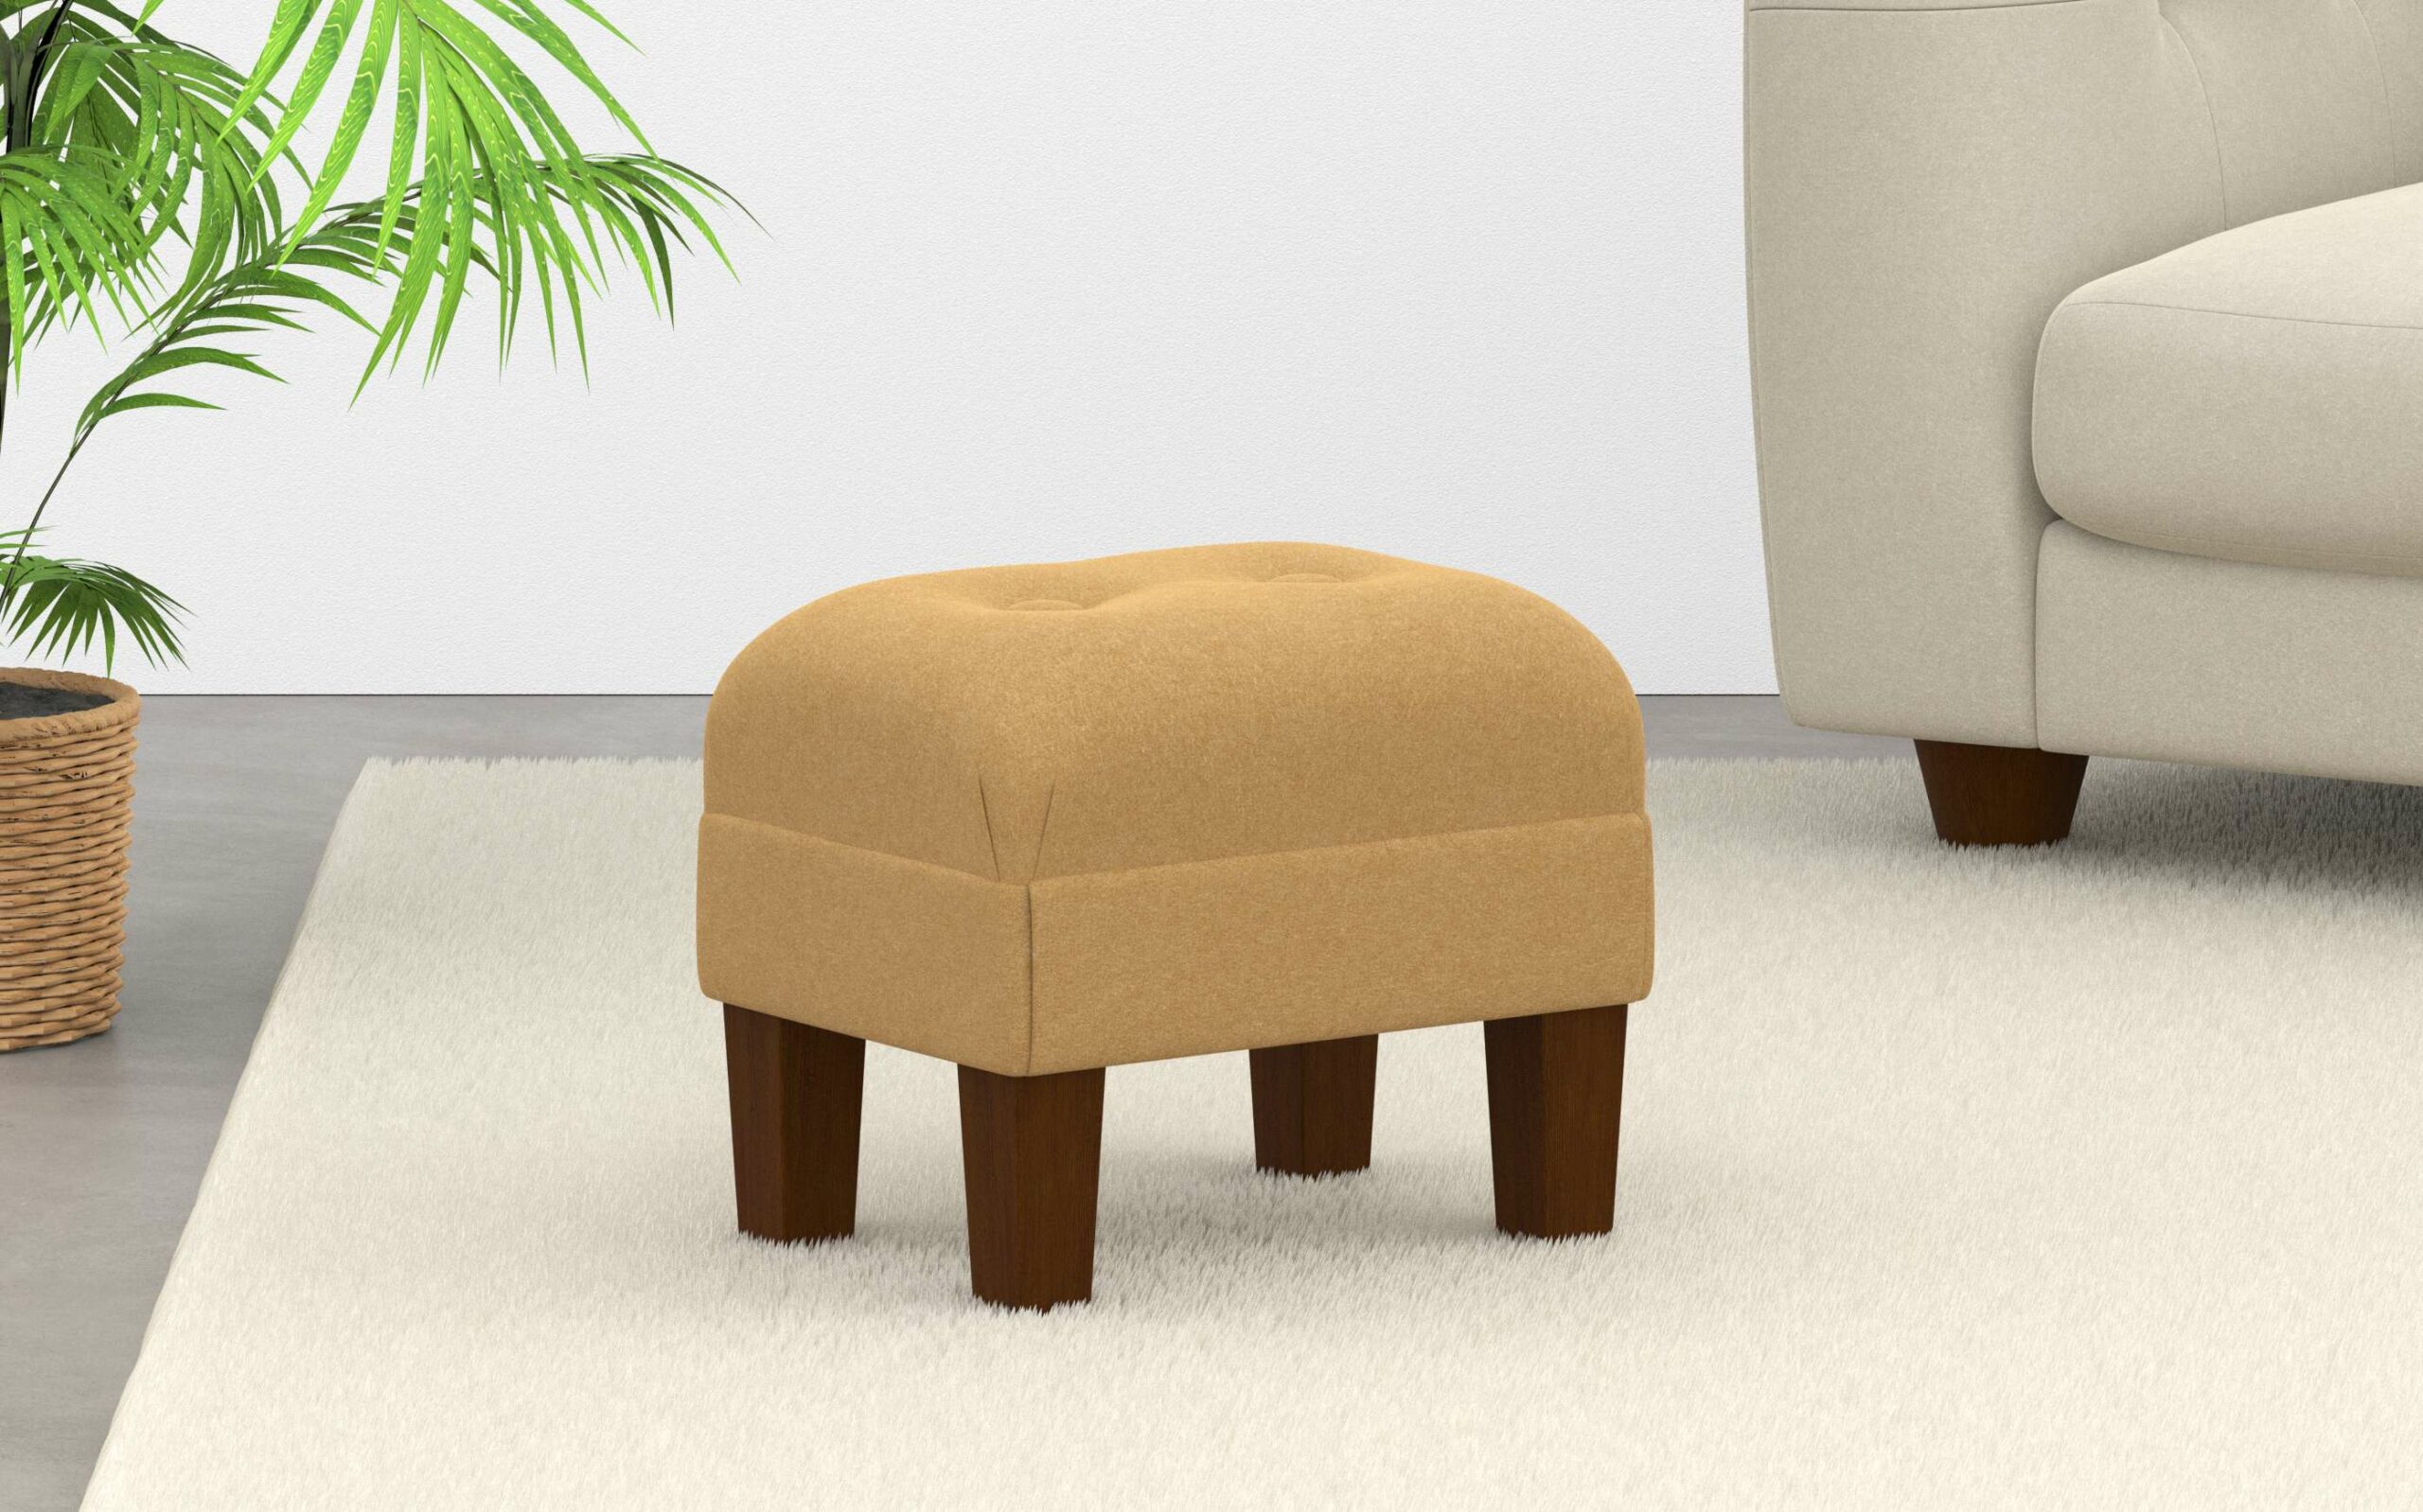 Otis | Small, Mini Button Footstool With Border - 30cm x 23cm | Vale  Footstools